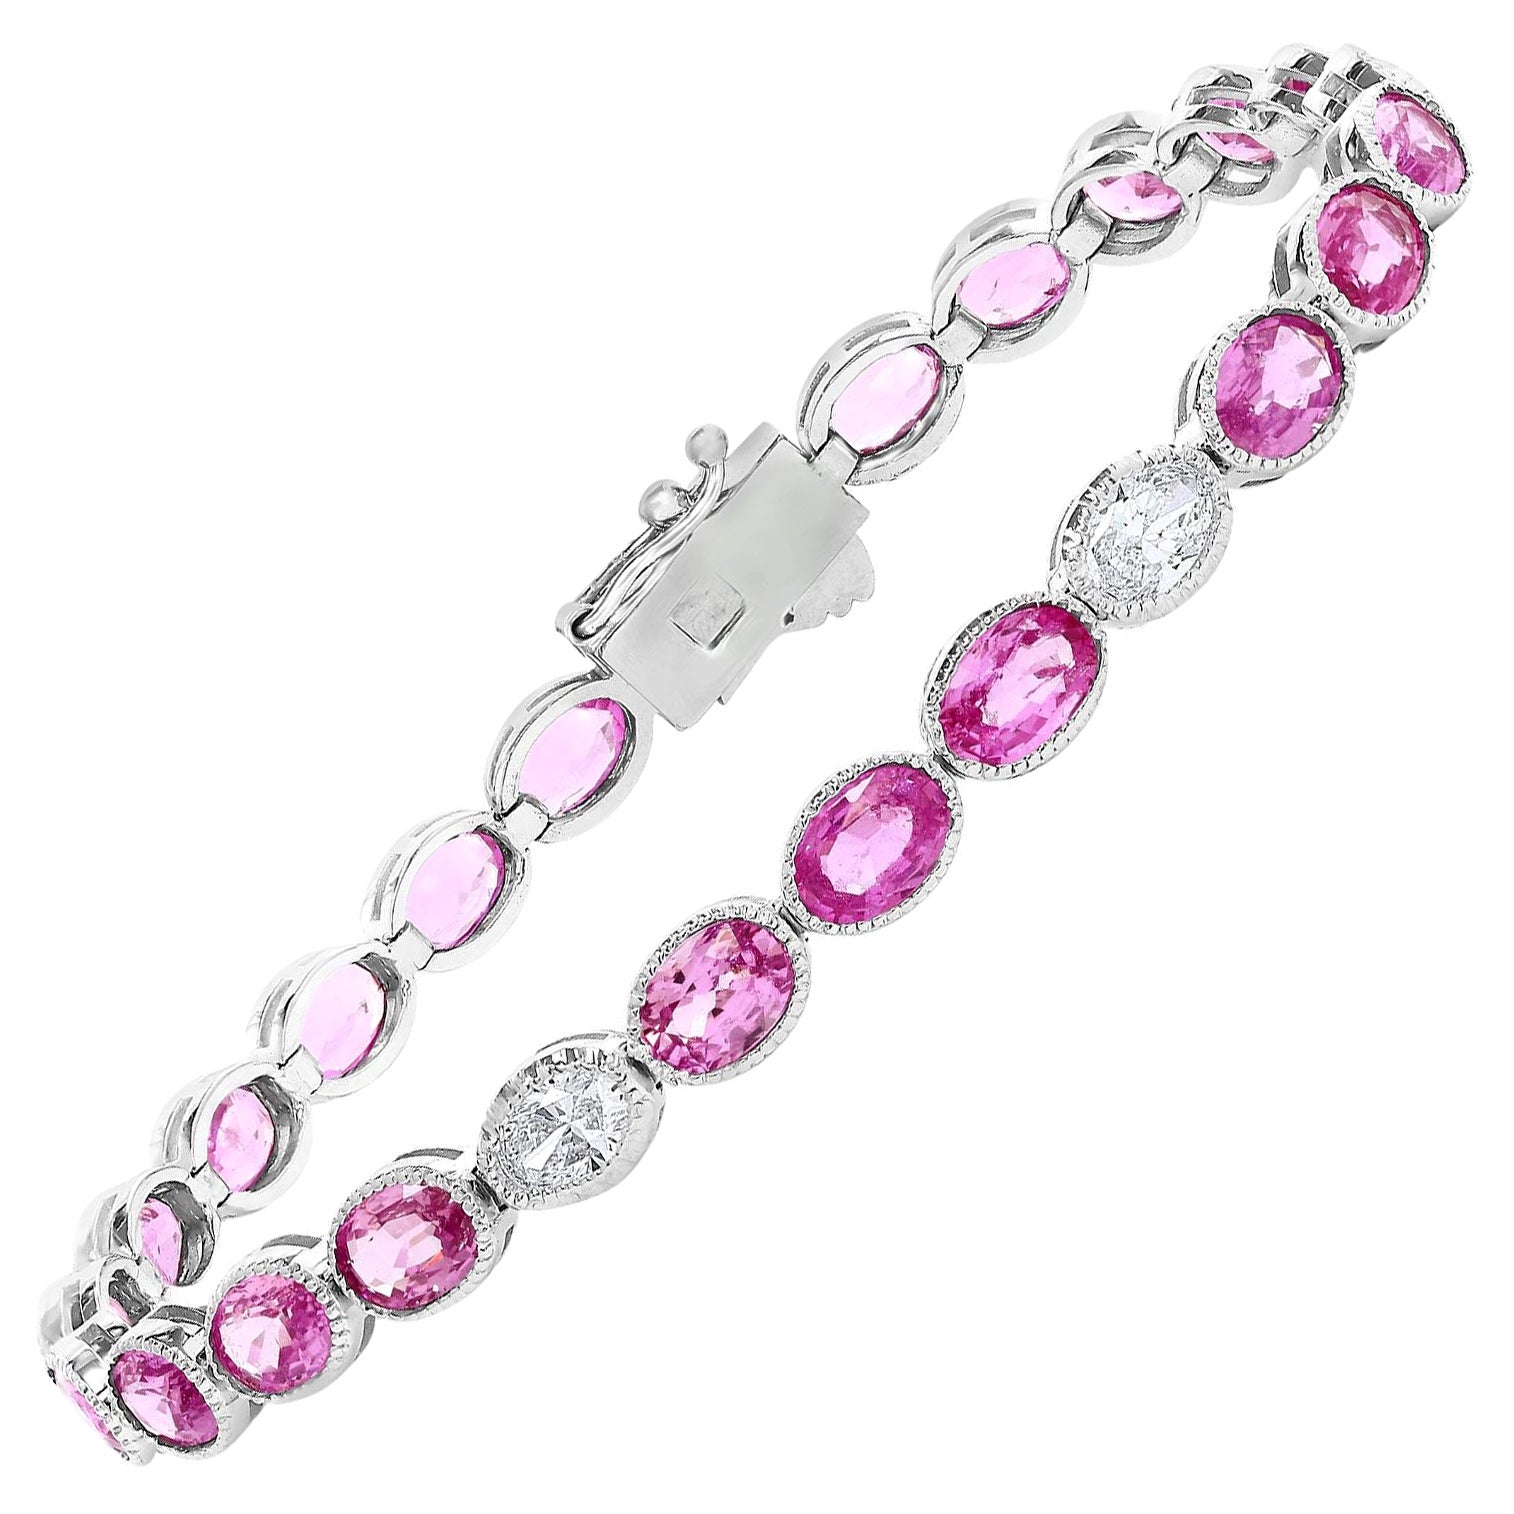 12.62 Carat Oval Cut Pink Sapphire and Diamond Tennis Bracelet in 14K White Gold For Sale